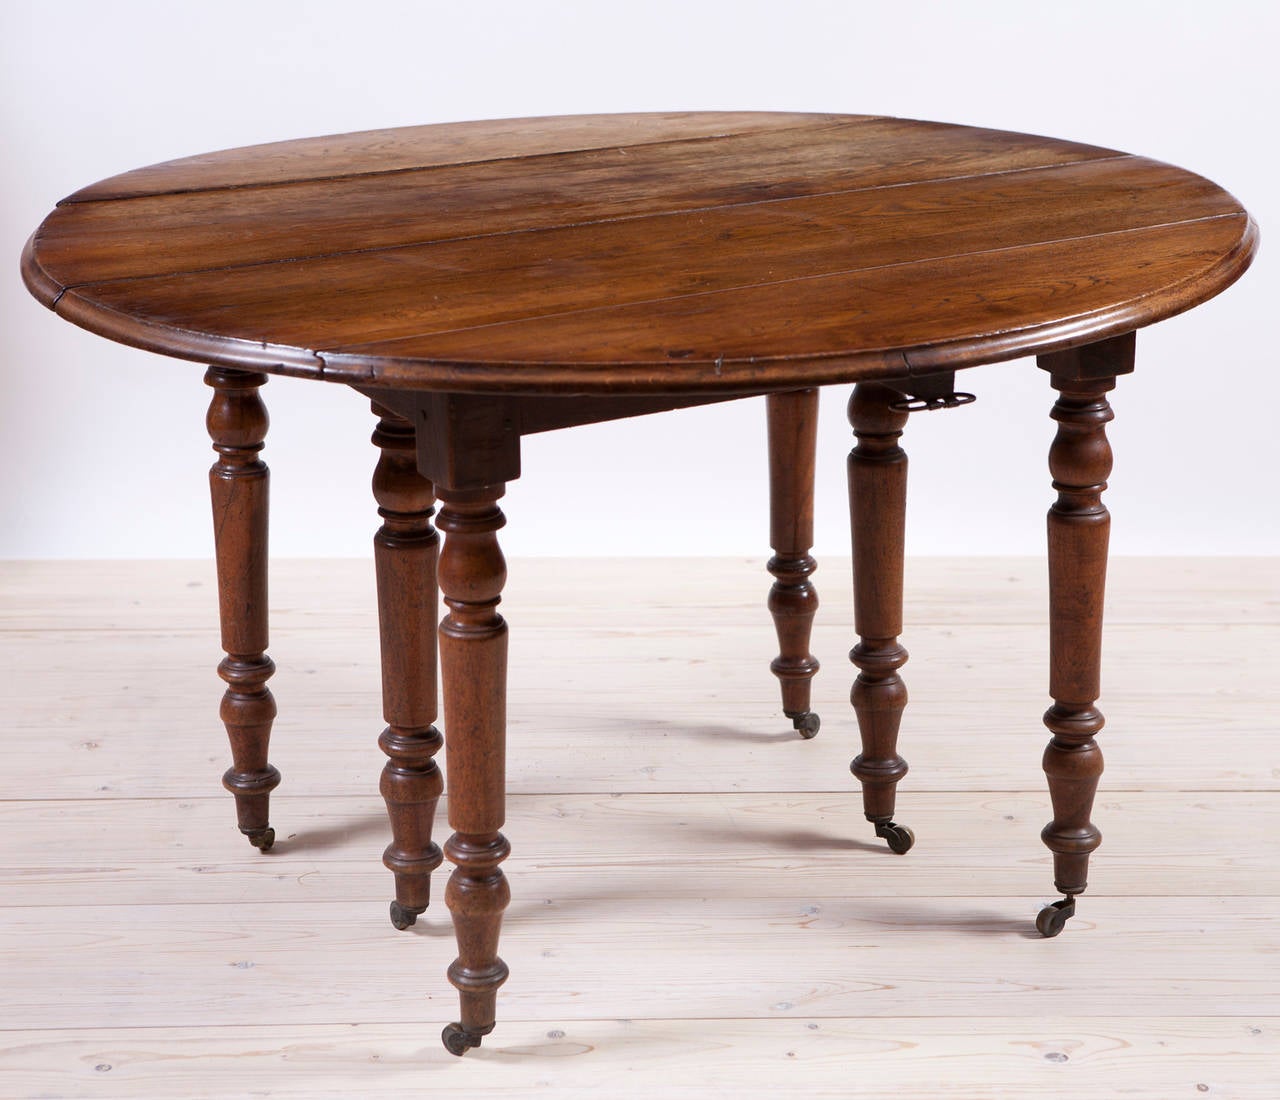 Extension Table in oak with turned legs and drop leaves, French or Flemish, c. mid to late 1700's. Note: When fully opened, table mechanism extends to 10’ 6” (but would require the making of additional leaves, which we can do for an additional